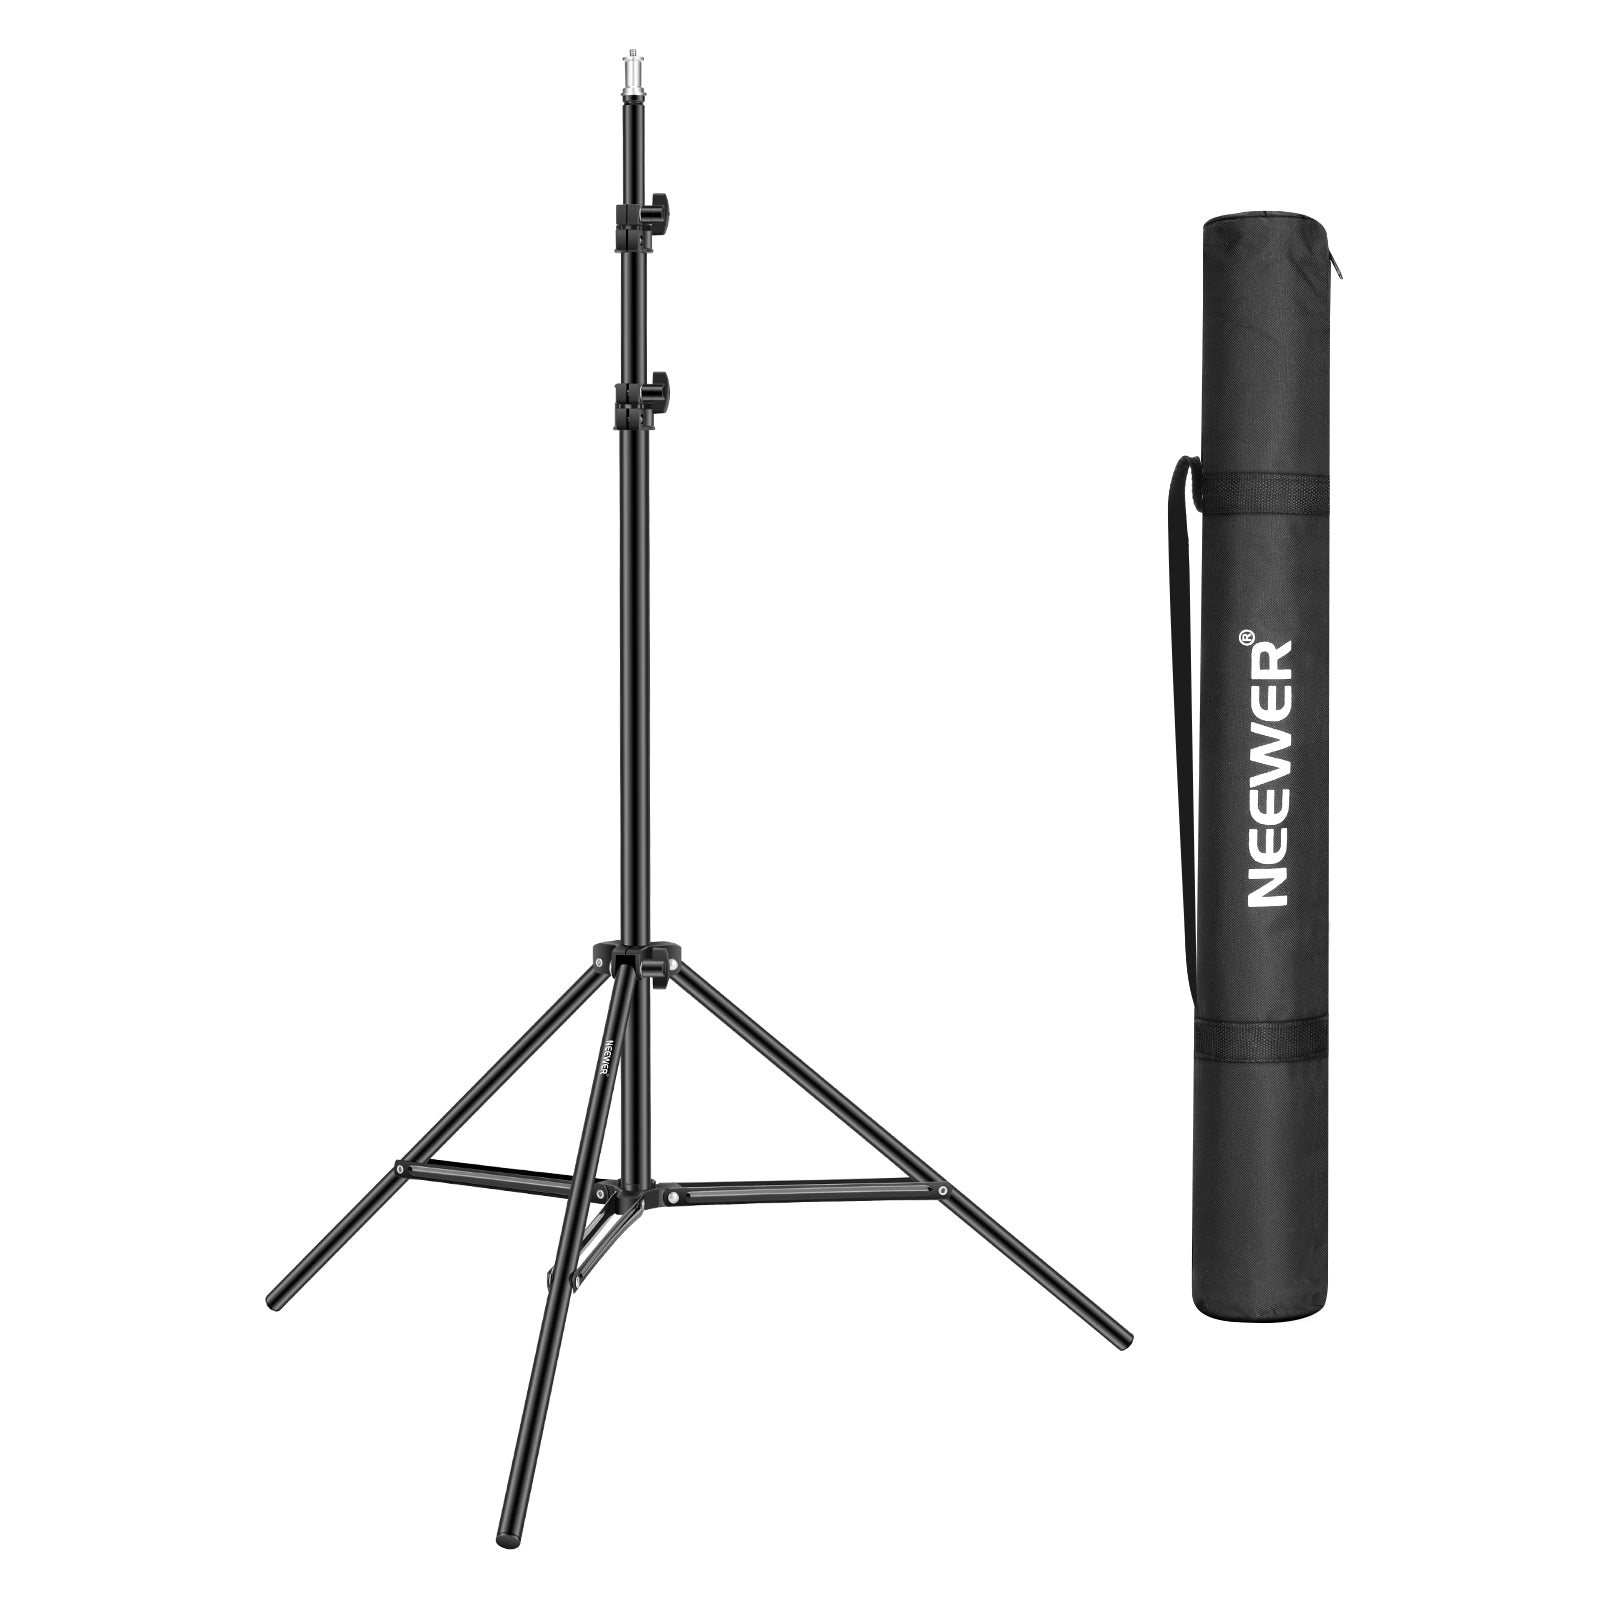 Neewer Heavy Duty Light Stand, 3-6.5 Feet/92-200 Centimeters Adjustable Photographic Stand Sturdy Tripod for Reflectors, Softboxes, Lights, Umbrellas